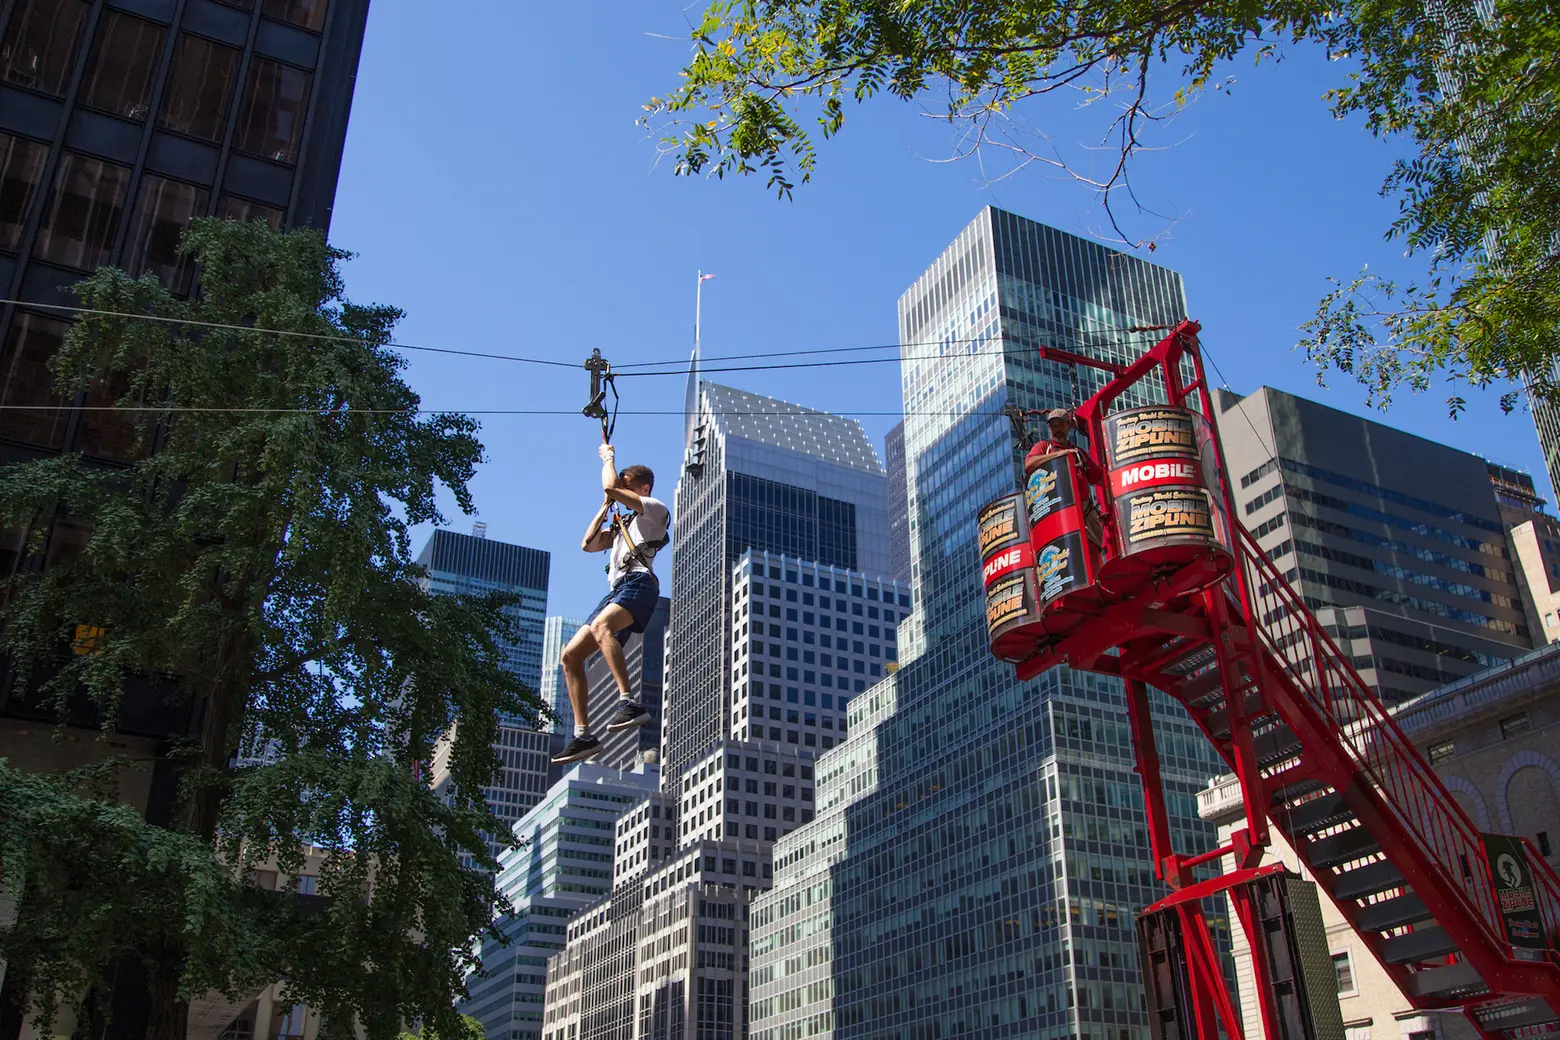 You can soar down Centre Street on a 165-foot-long zipline this August